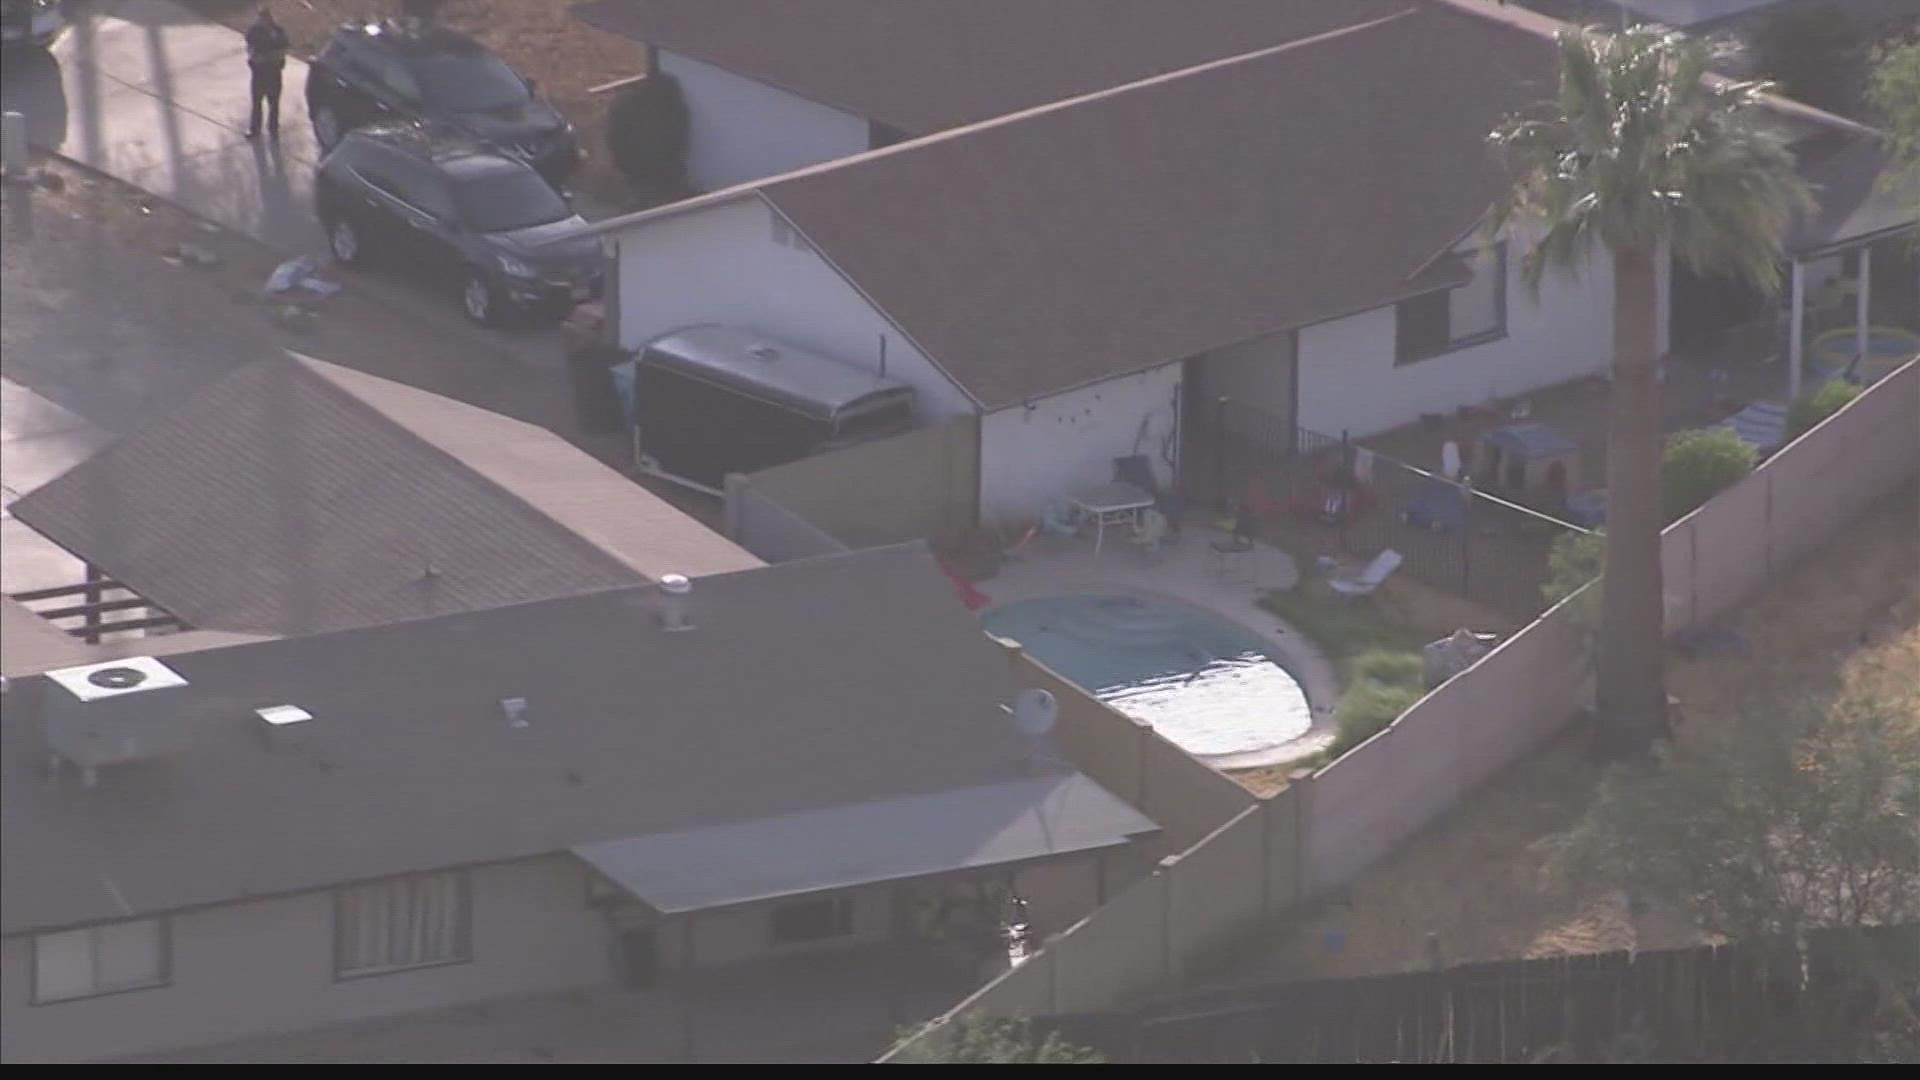 Phoenix fire says family began CPR before first responders arrived at the home near 51st Avenue and Bell Road.